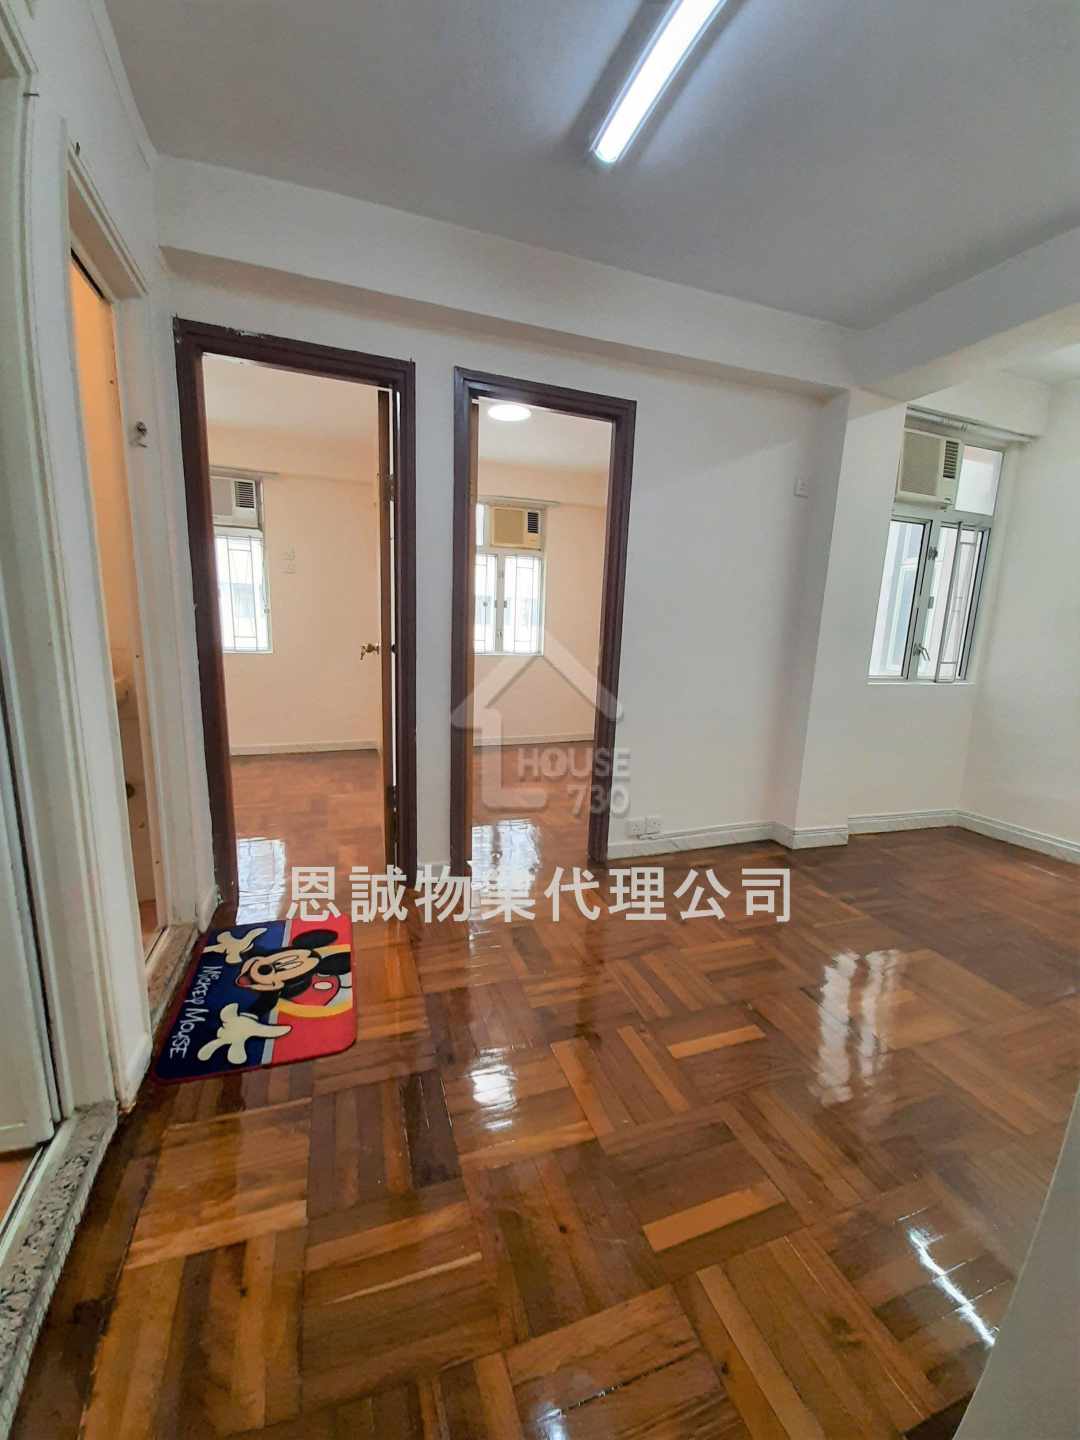 Single Building (Yuen Long District) 元朗洋樓 Lower Floor Dining Room House730-6863951